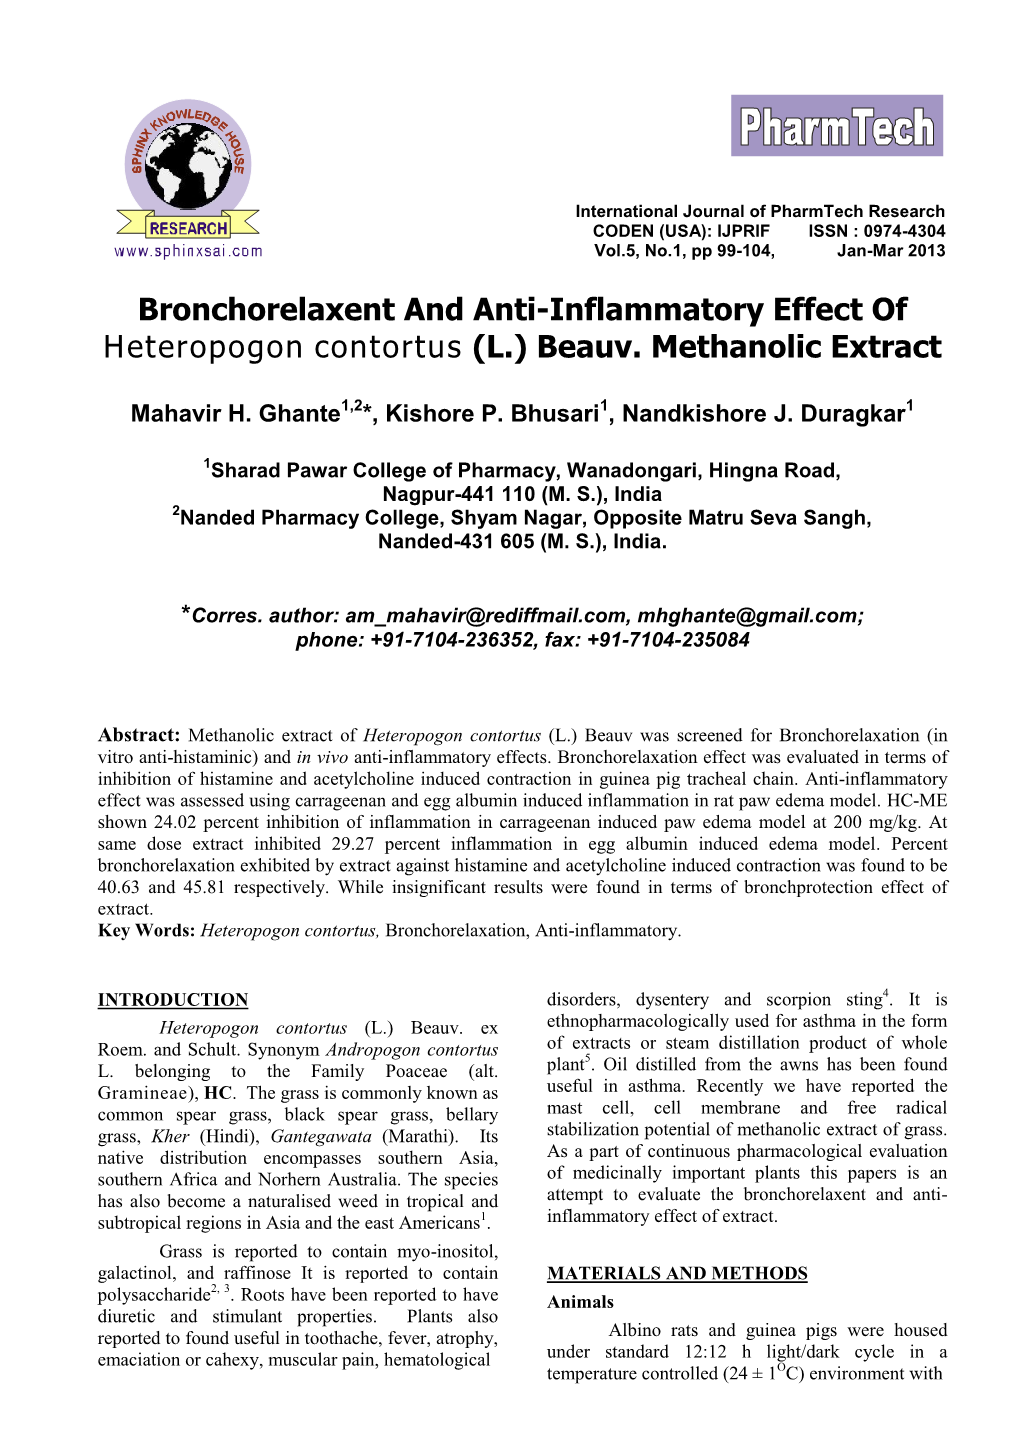 Bronchorelaxent and Anti-Inflammatory Effect of Heteropogon Contortus (L.) Beauv